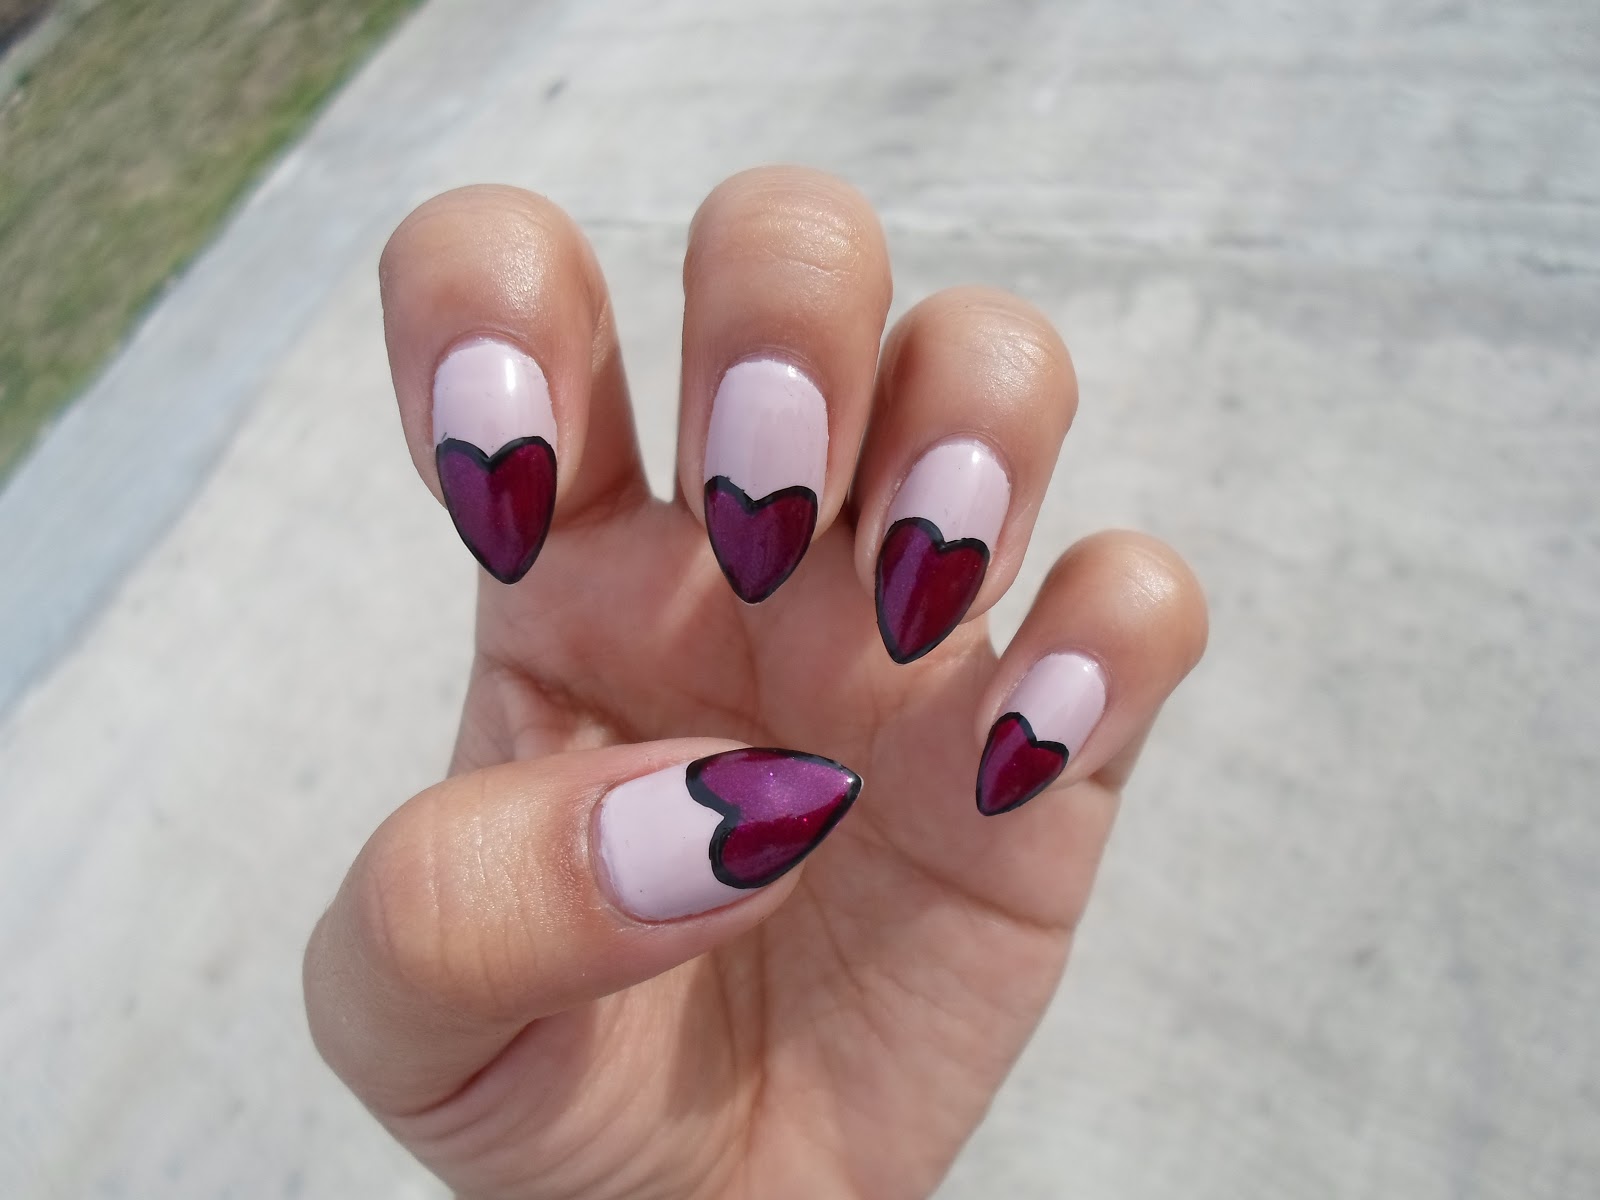 2. "Cute and Easy Valentine's Day Nails for Short Nails" - wide 2